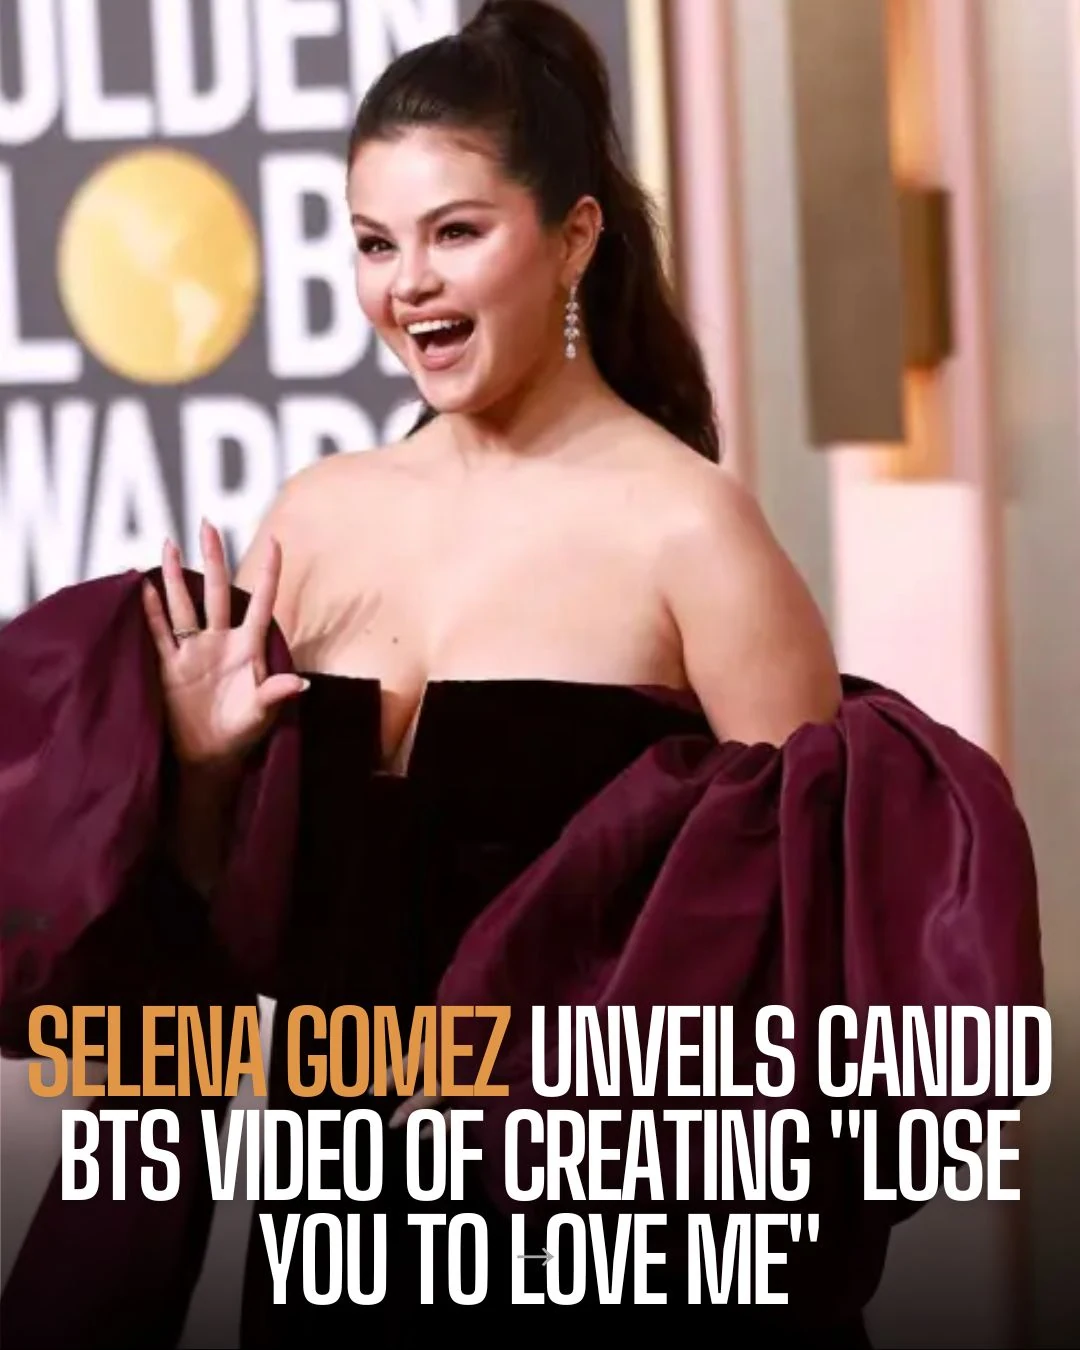 Selena Gomez Unveils Candid BTS Video of Creating Lose You To Love Me